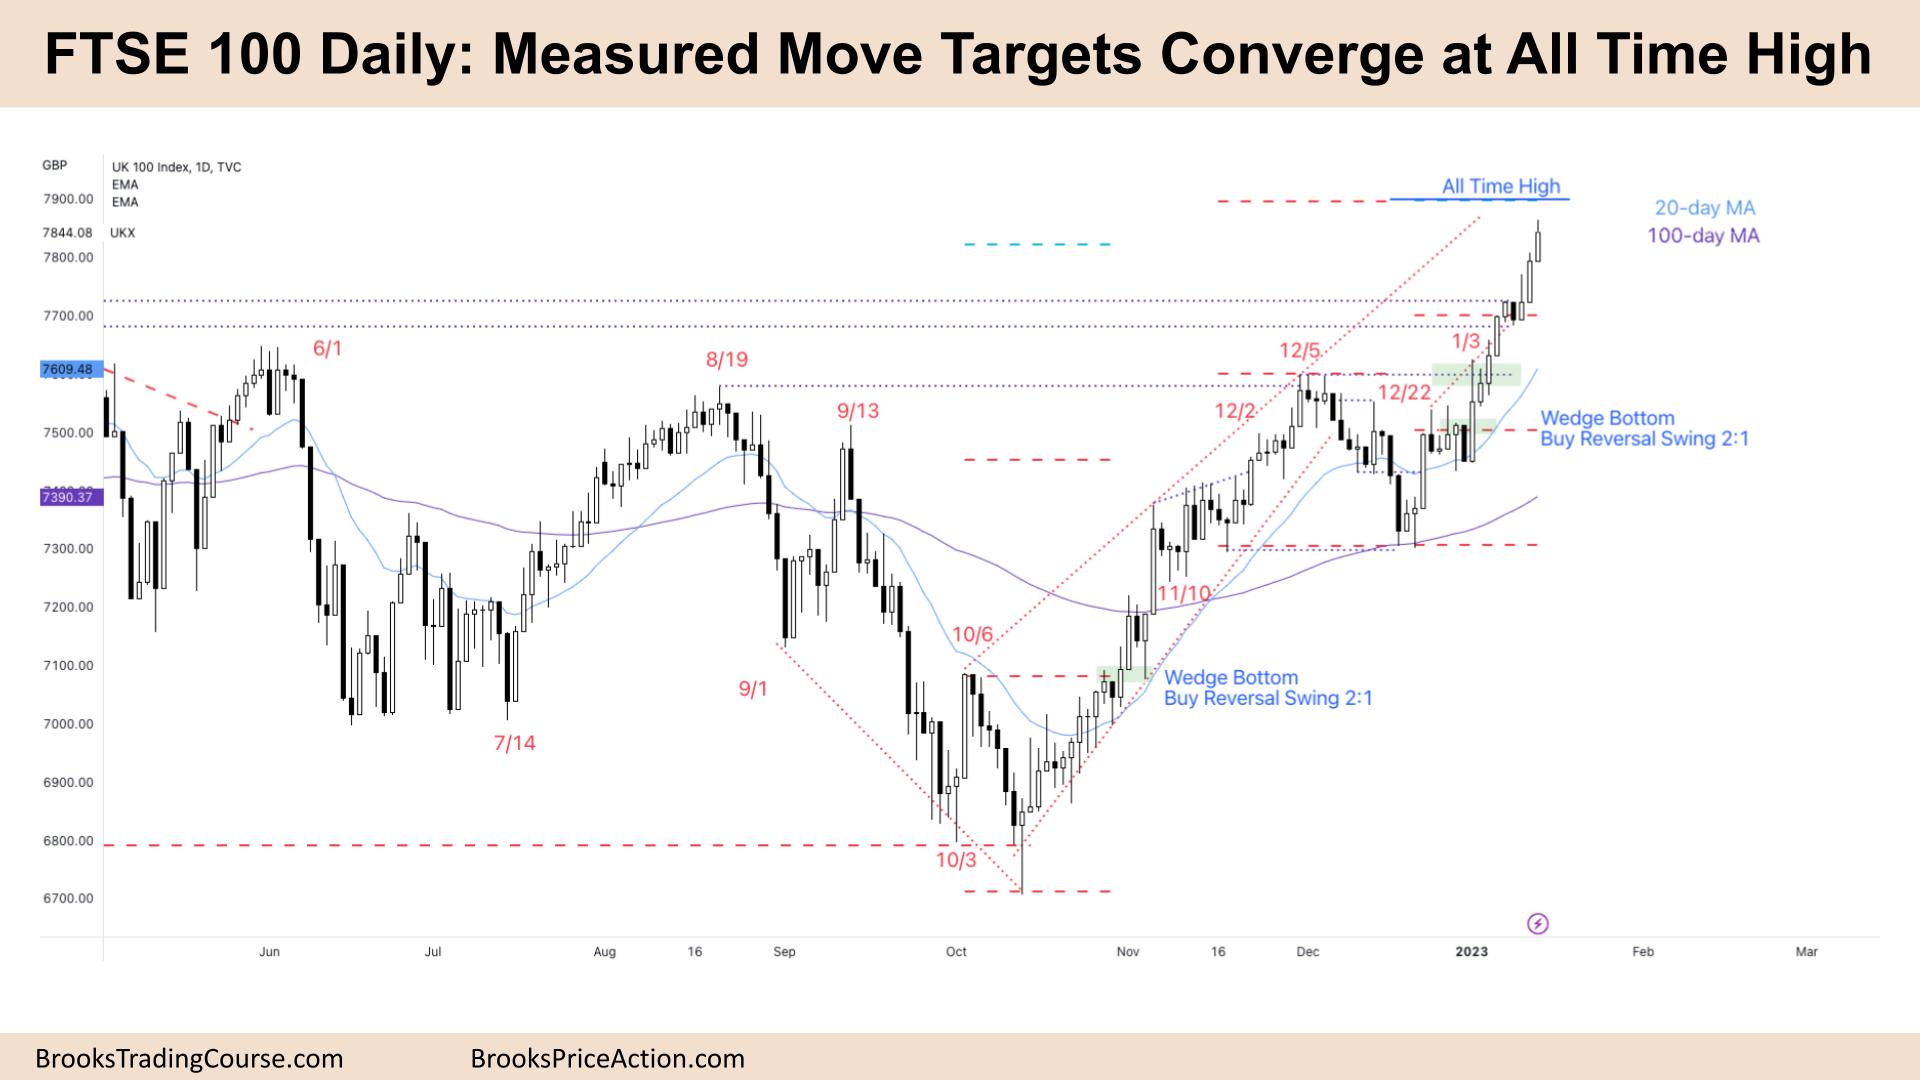 FTSE 100 Measured Move Targets Converge at All-Time High